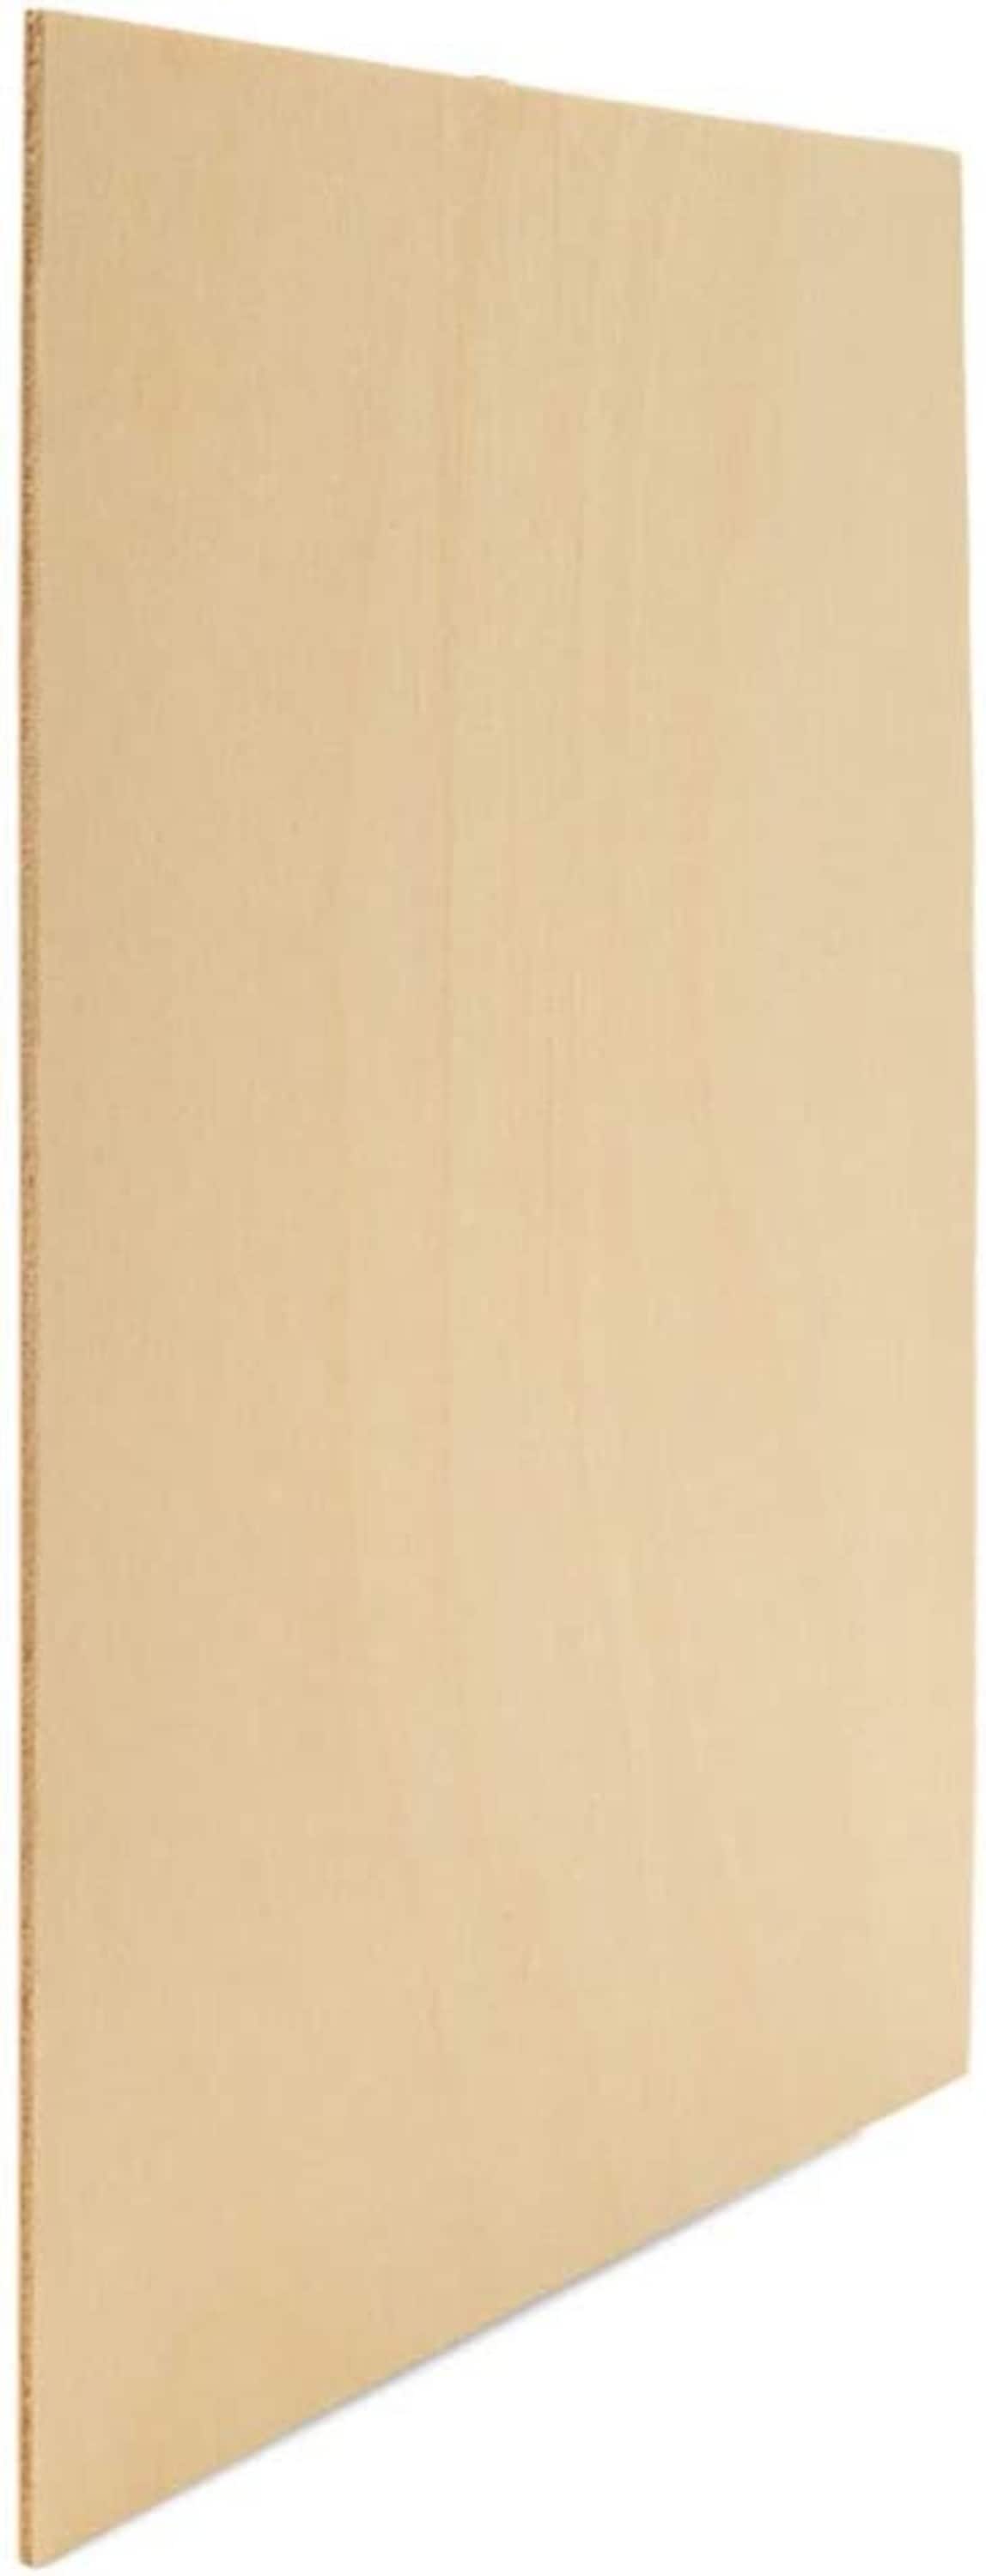 Woodpeckers Crafts Baltic Birch Plywood, 3 Mm 1/8 X 12 X 8 In. Craft Wood,  Box Of 16 B/Bb in the Craft Supplies department at